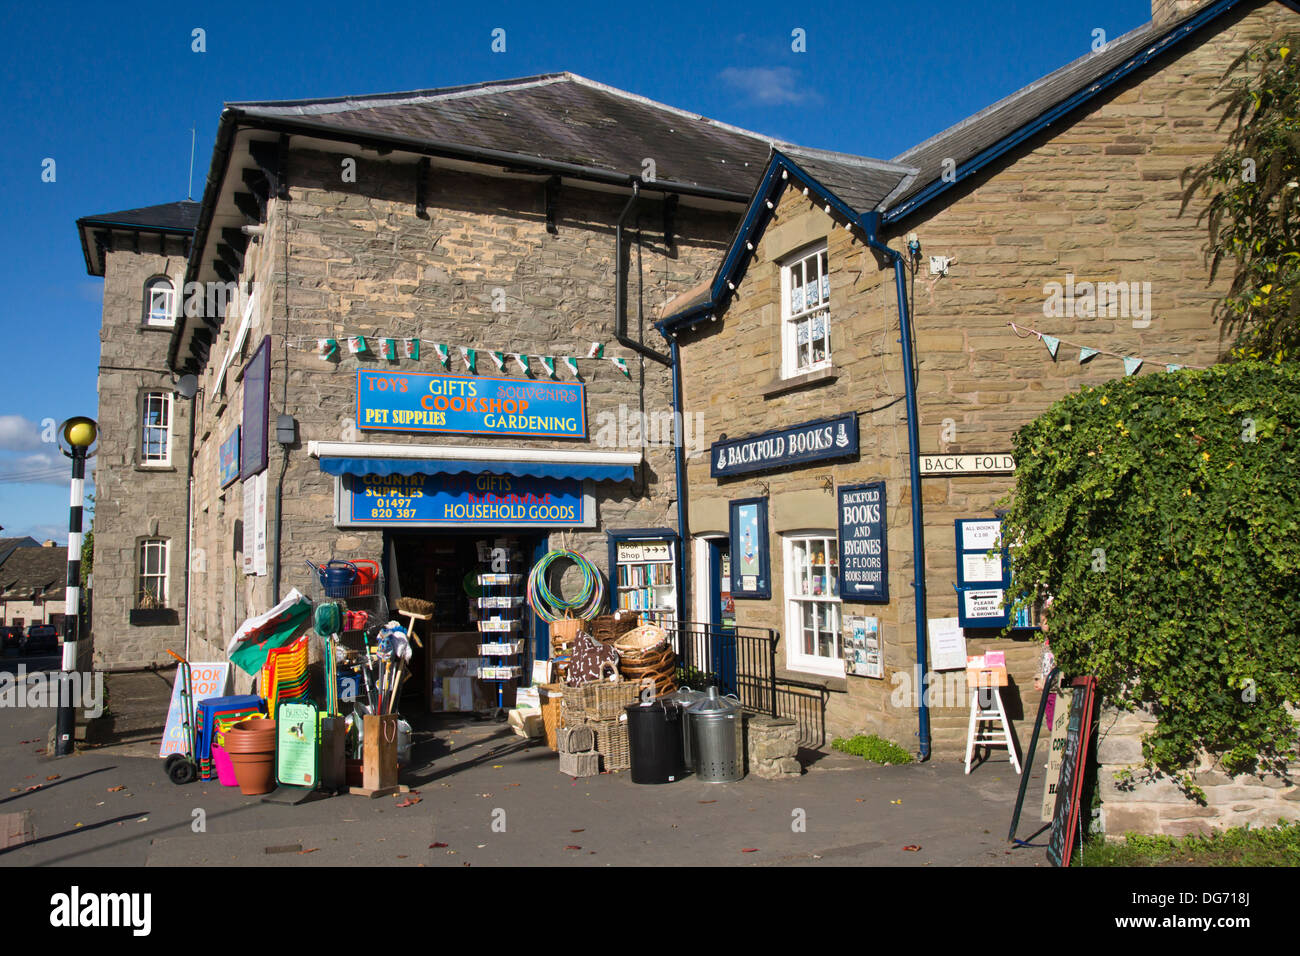 Hay-on Wye a small town in Powys Wales famous for its bookshops and Literary festival. Stock Photo